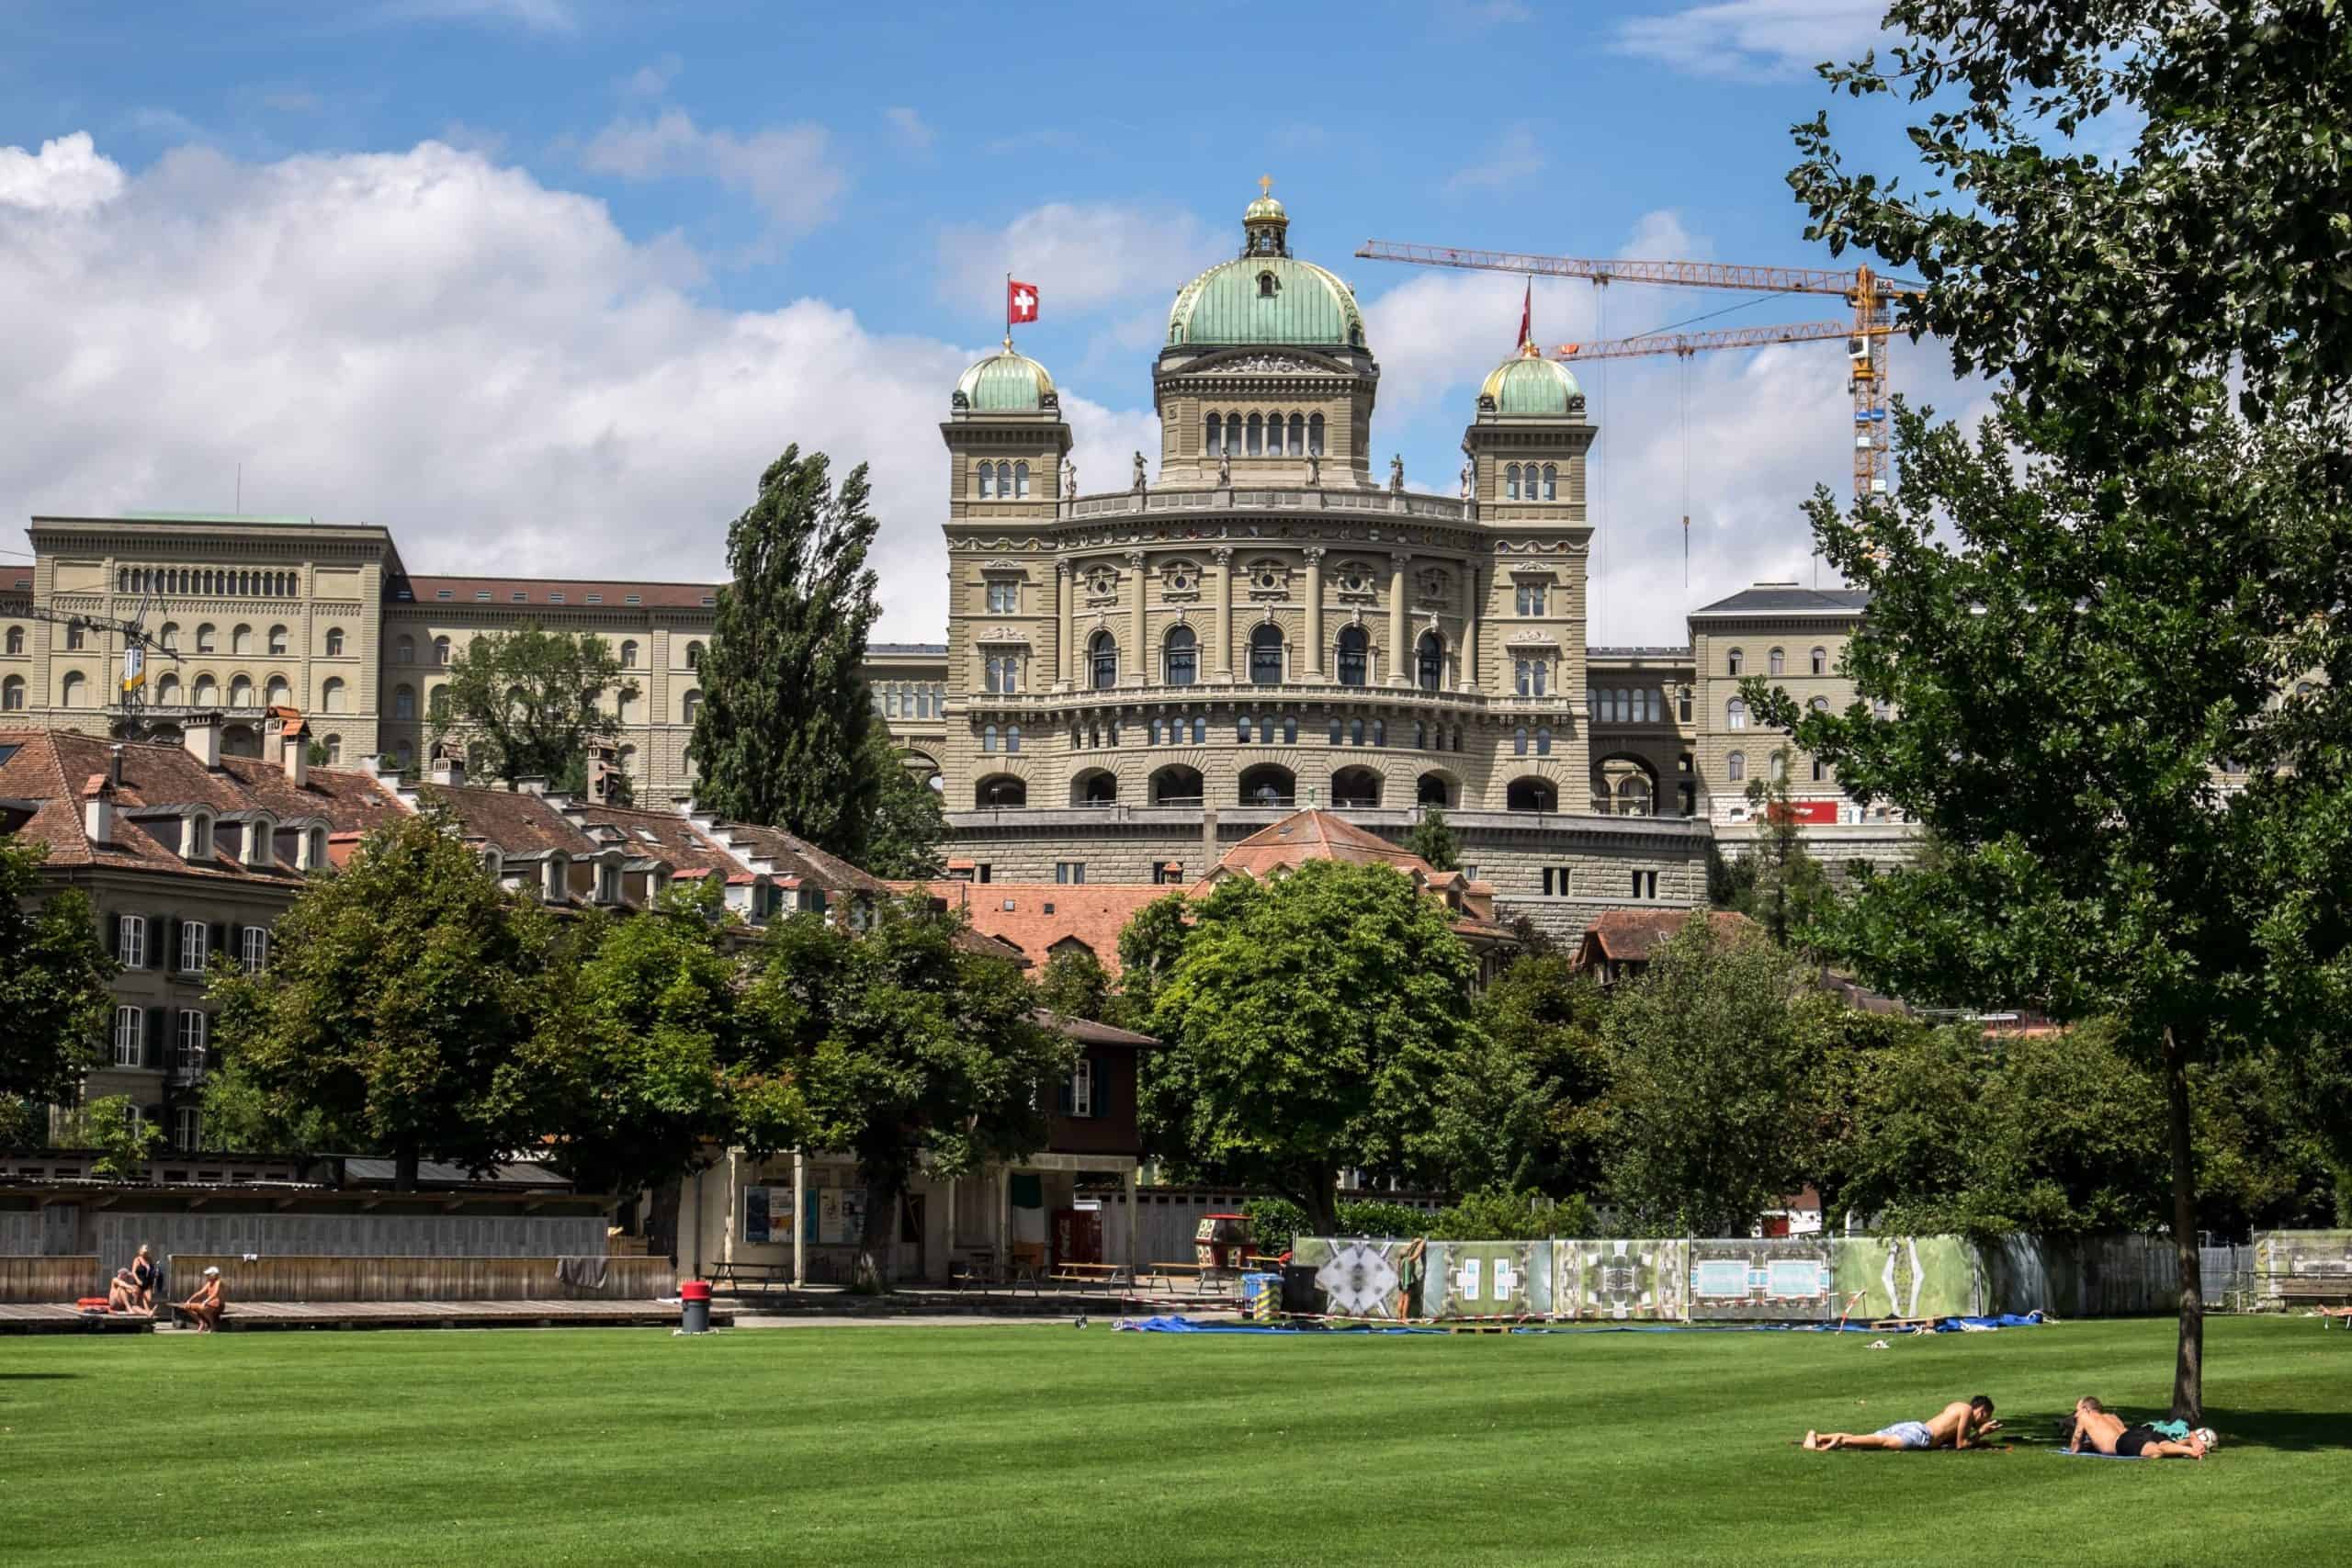 View of Federal Palace of Switzerland Parliament building in Bern, seen from Aare Riverside park